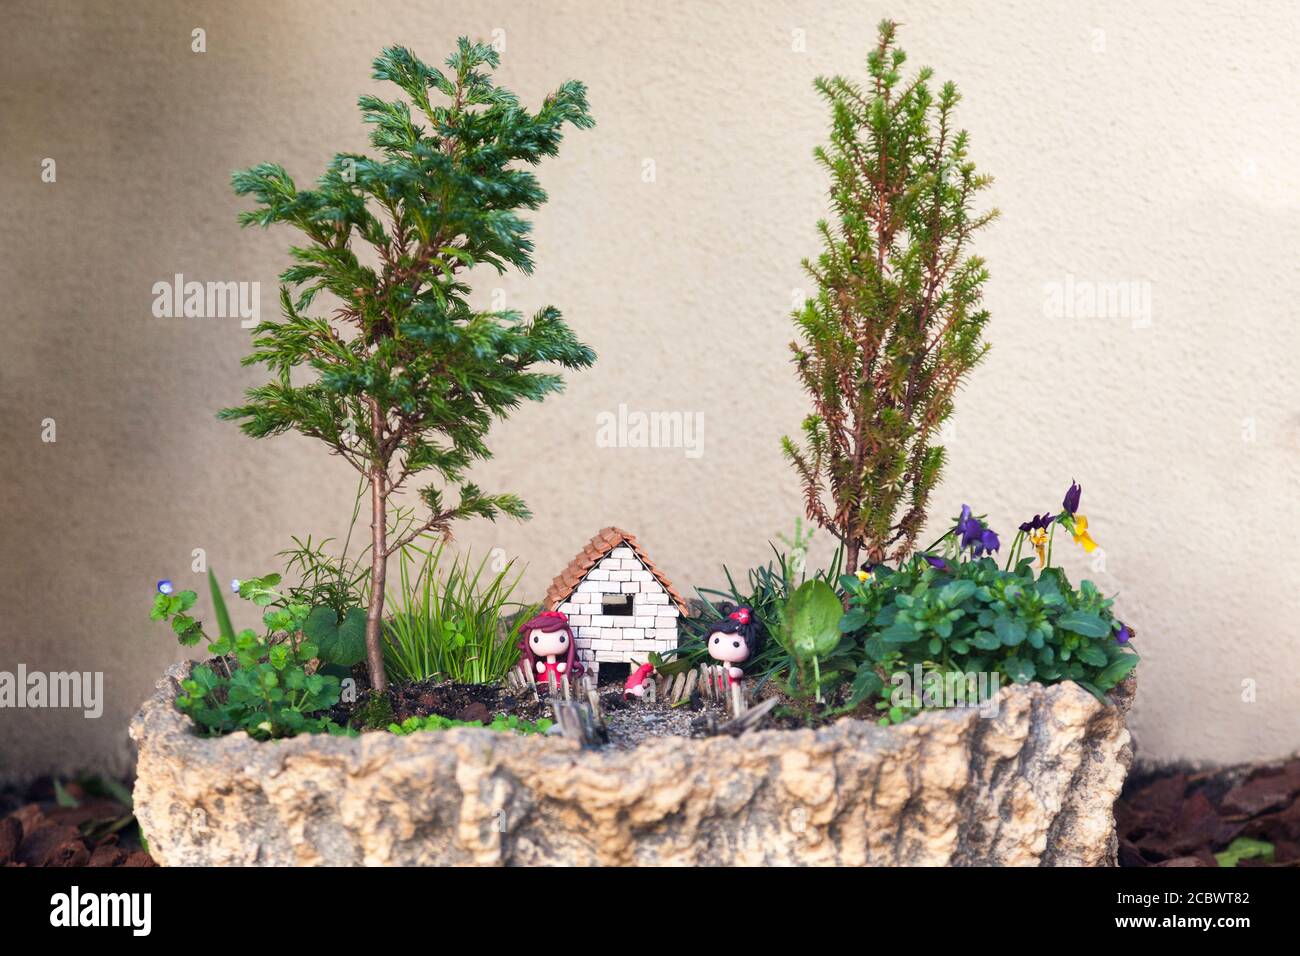 Outdoor fairy mini garden with dolls, trees and a small house Stock Photo